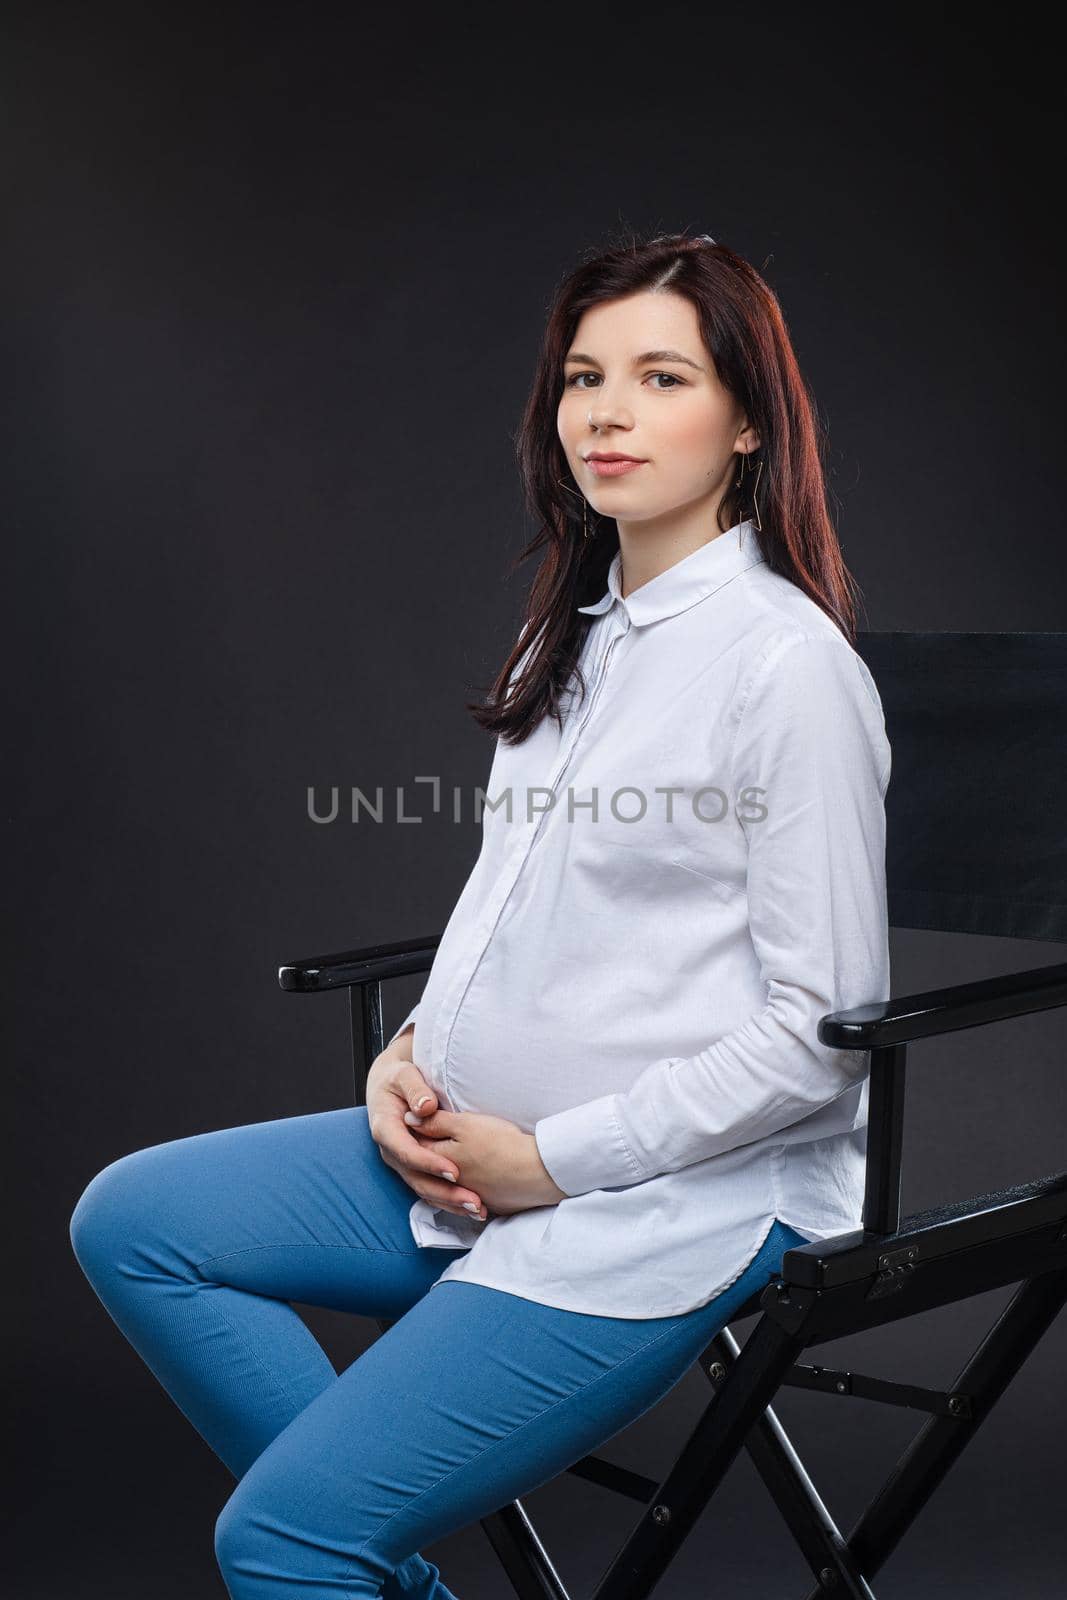 beautiful pregnant mum posing for the camera on a chair in the dark studio